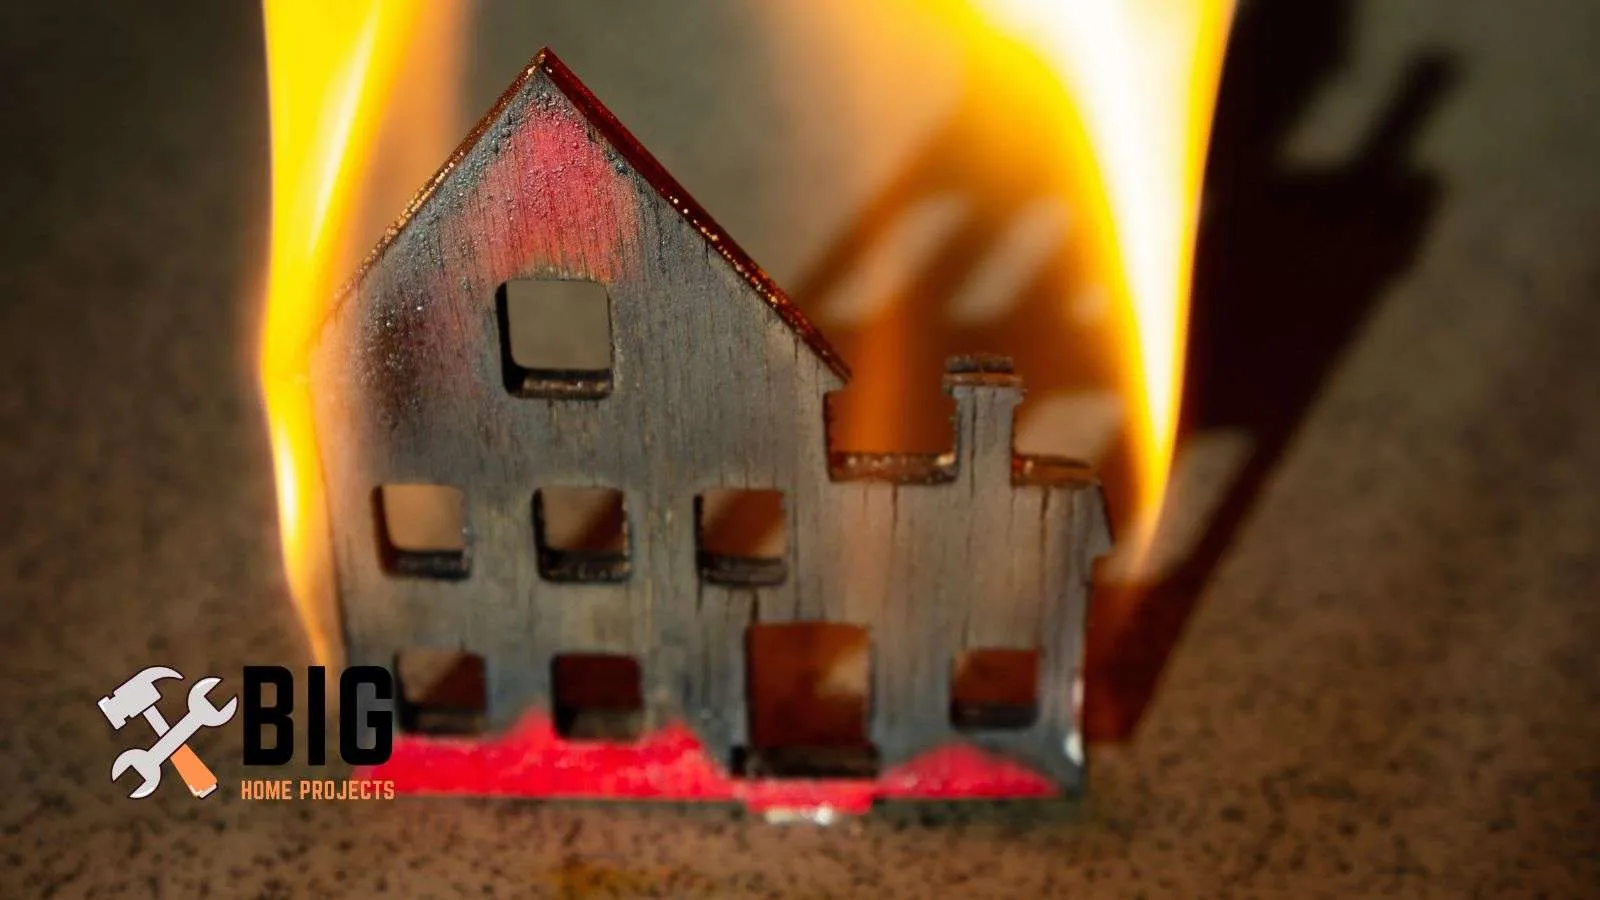 Home fire prevention month - bighomeprojects.com